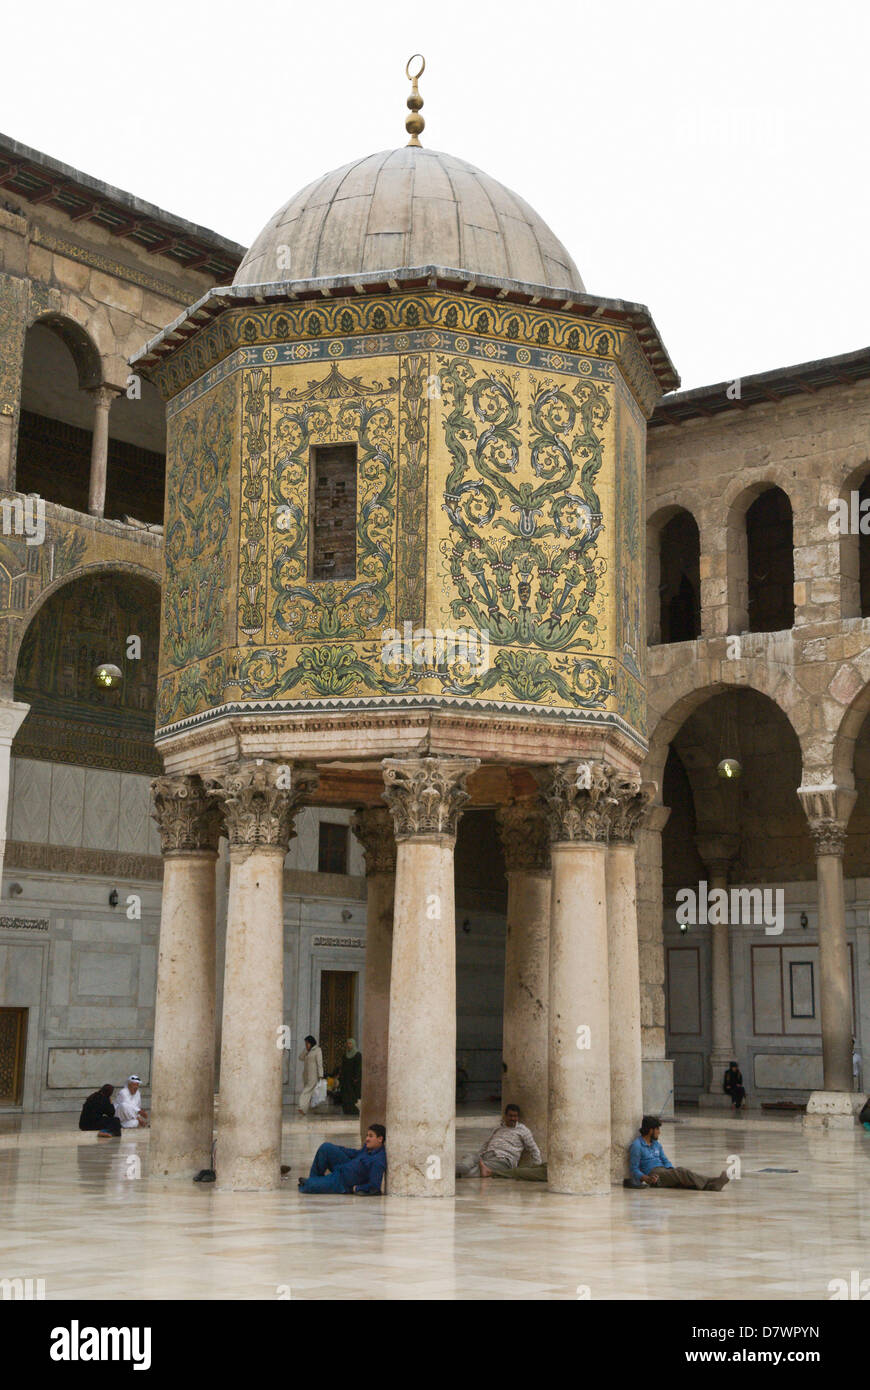 Damascus, Syria. The Great Umayyad Mosque, an 8th century Islamic monument. Octagonal Treasury with gold and green mosaics Stock Photo